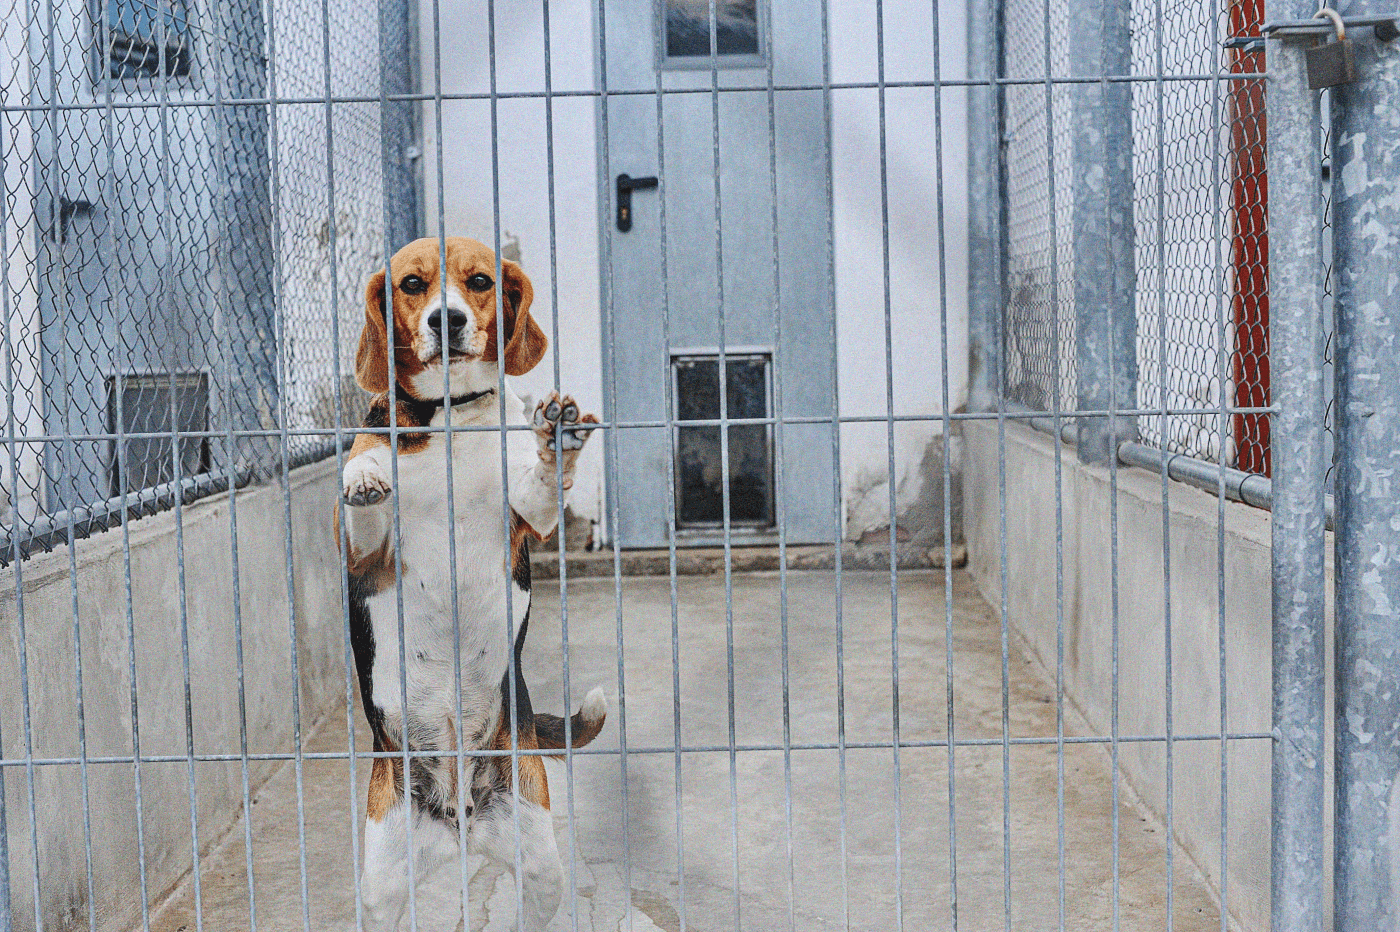 A beagle in a barren cage who is being used for animal testing.